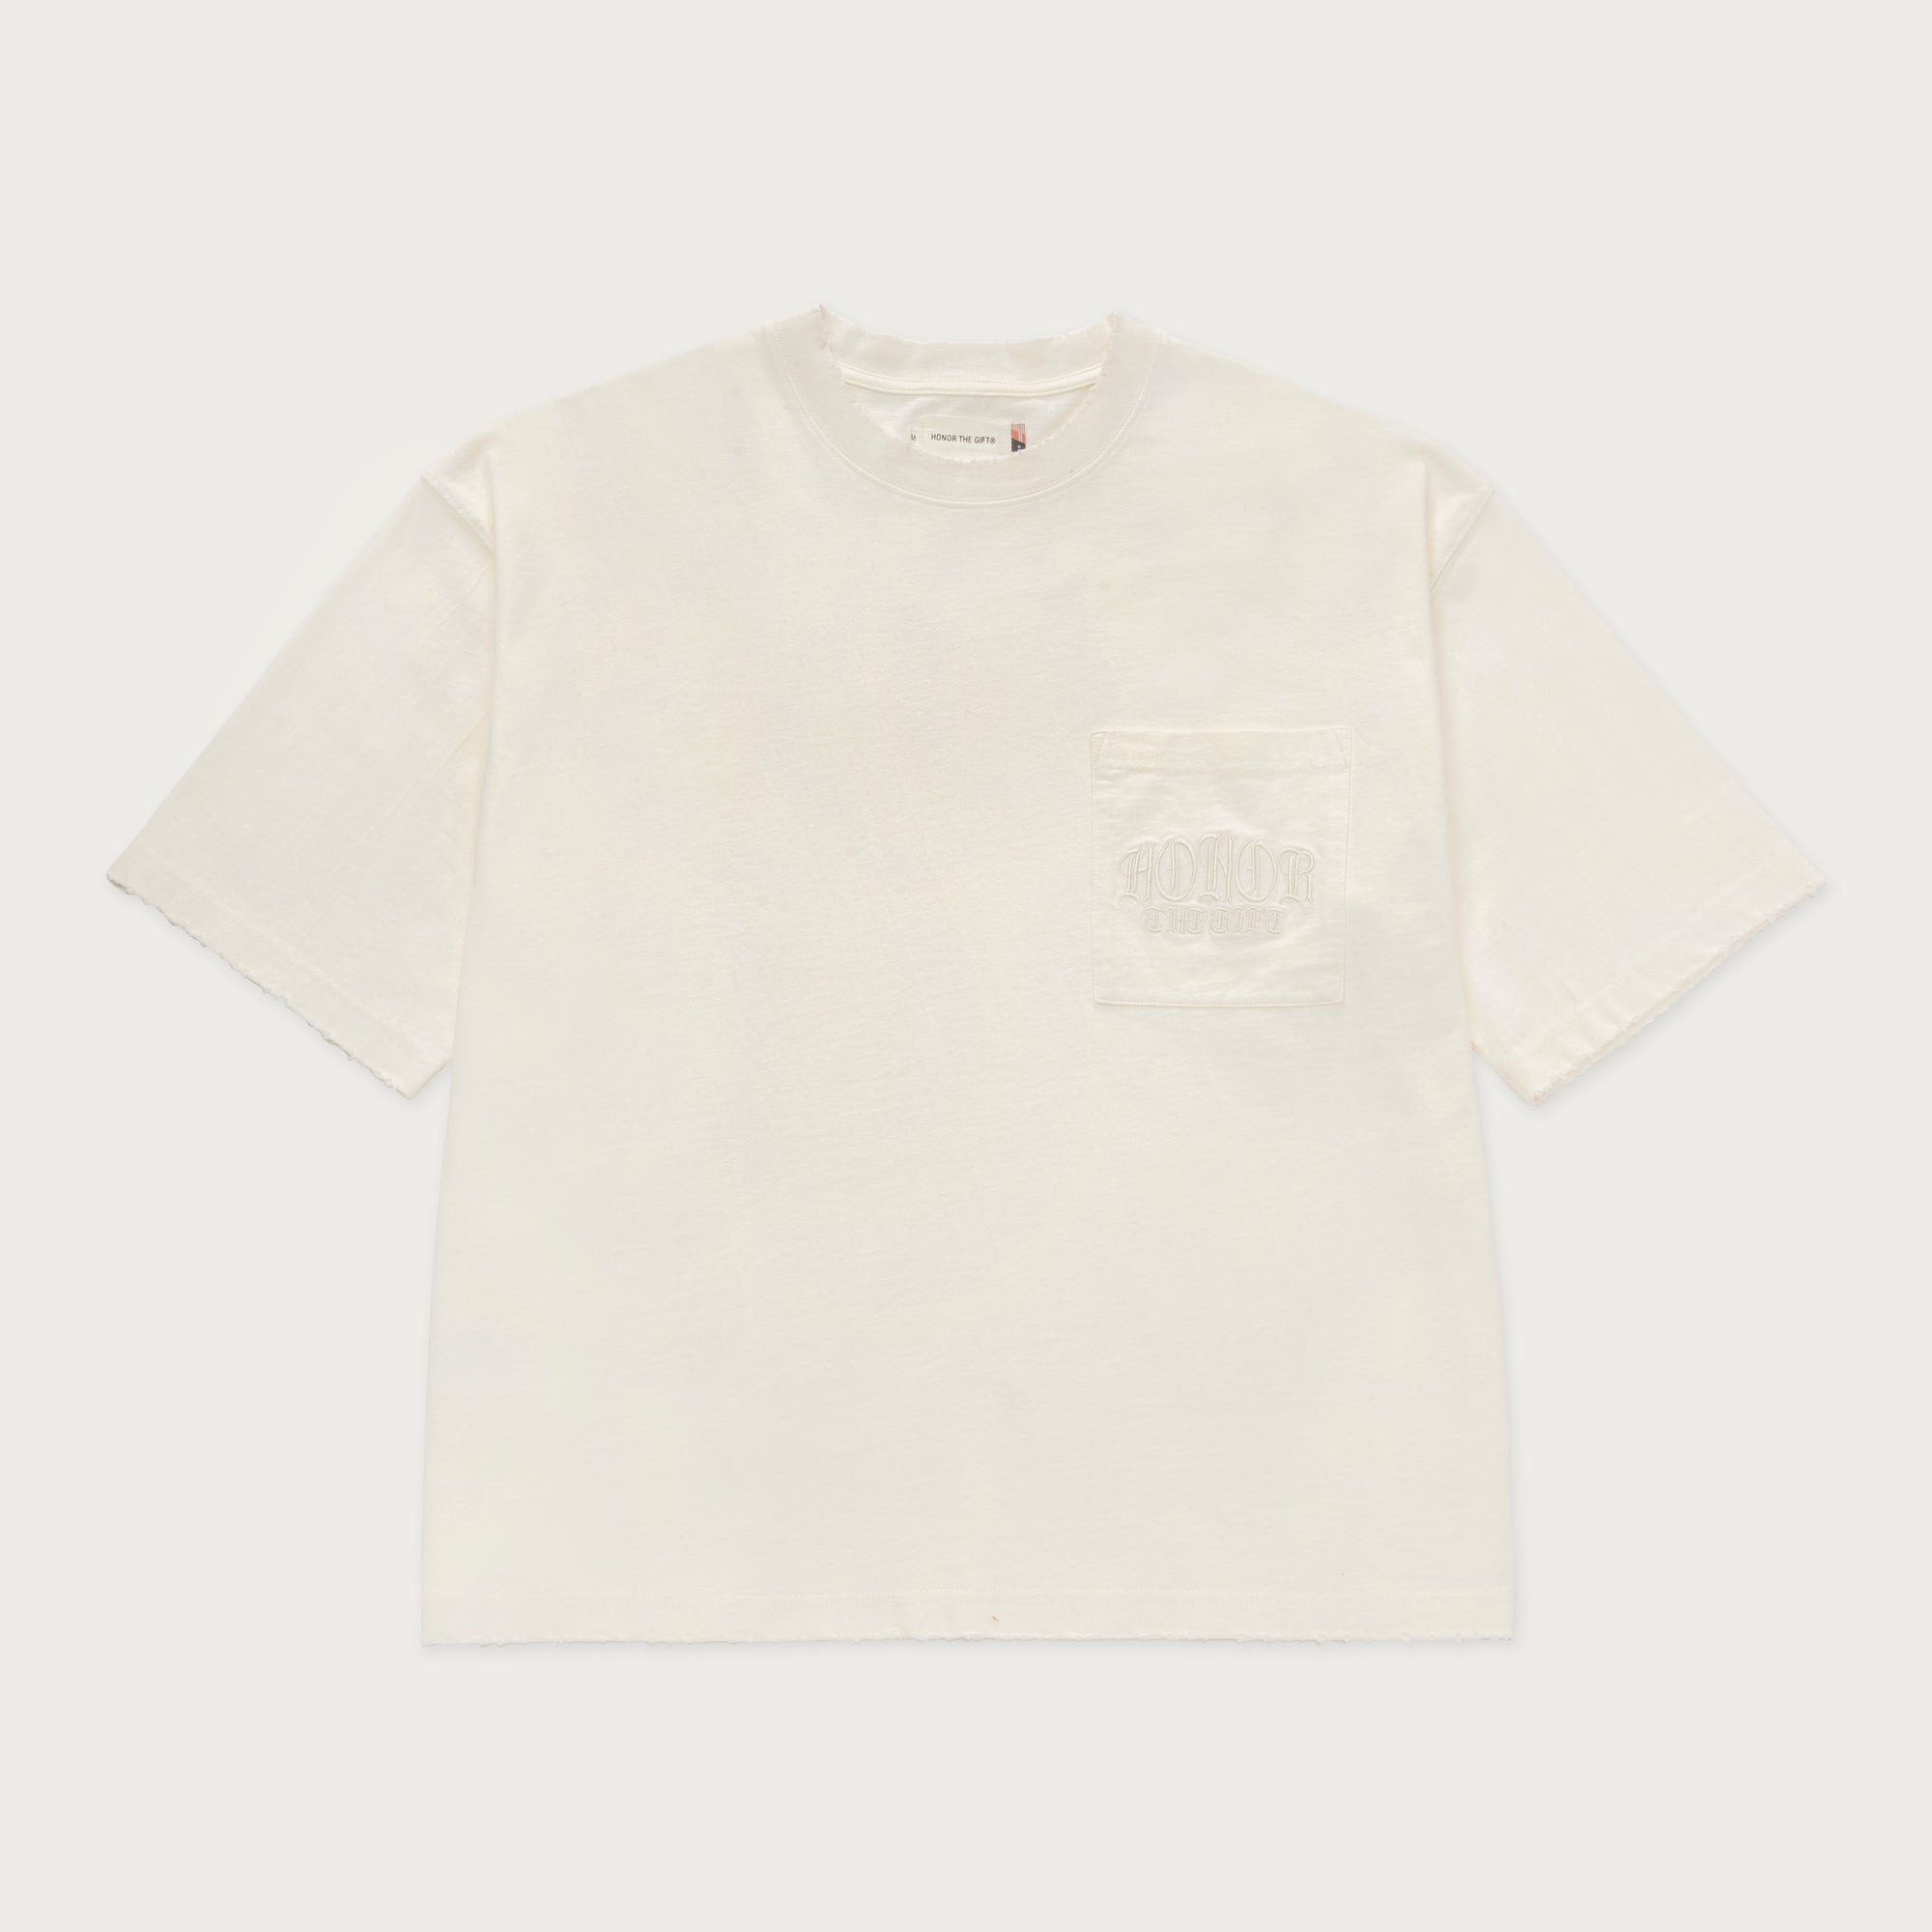 Copy of Embroidered Pocket Tee - Bone